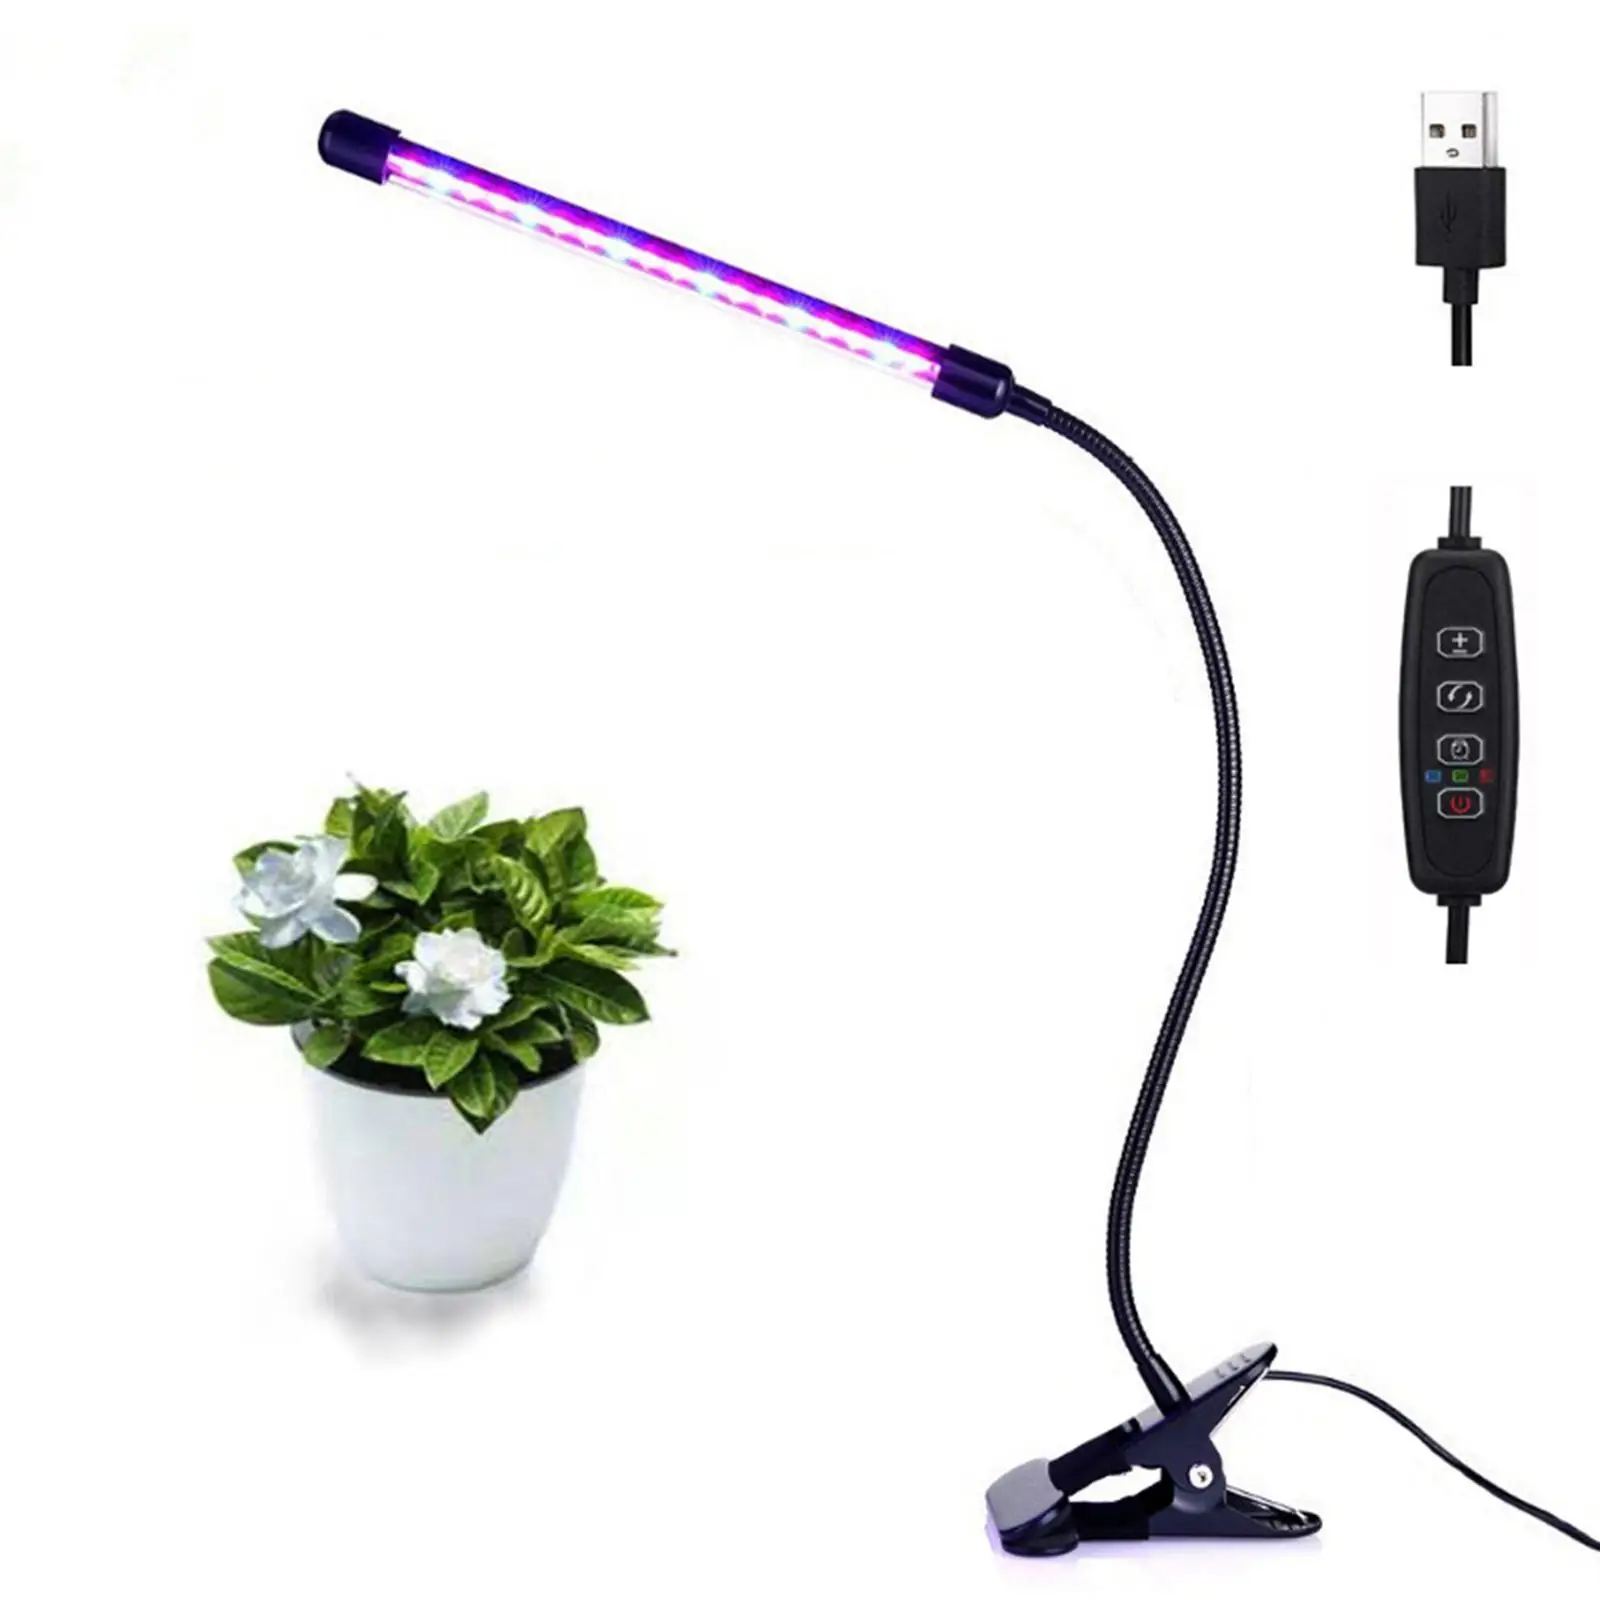 LED Grow Light Auto Off Timing 3 9 12Hrs 3 Modes Plant Light Plant Lamp for Greenhouse Gardening Seedling Vegetables Flowers